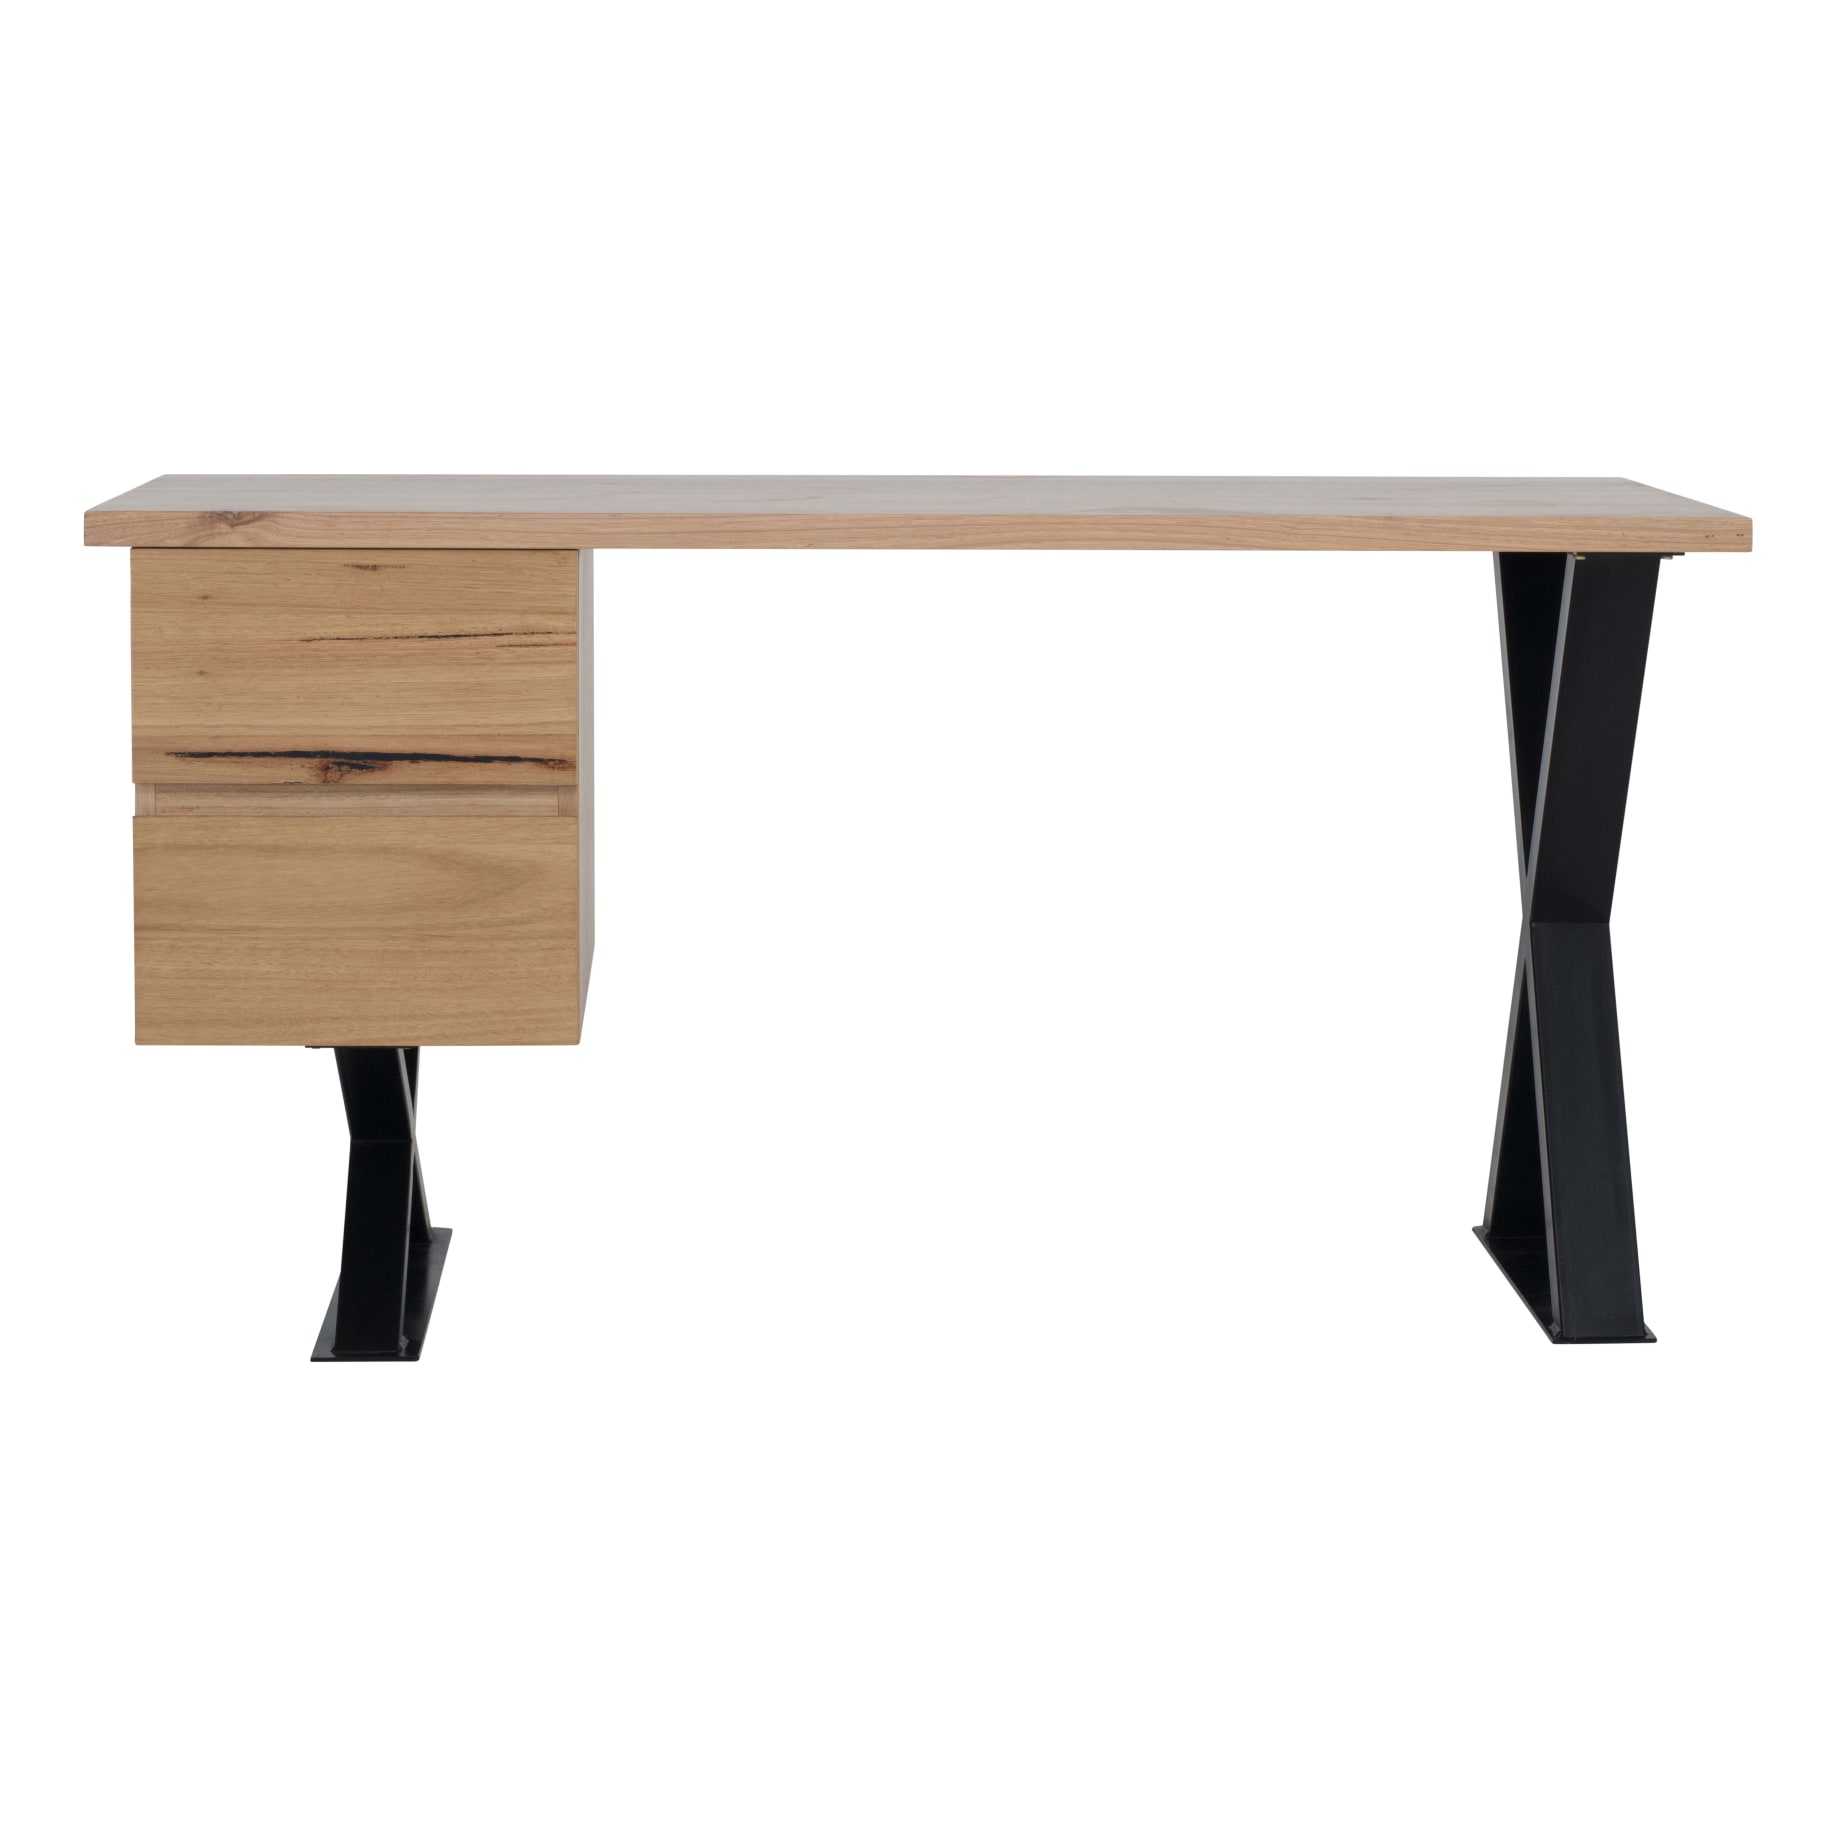 Rawson Desk with Drawers in Messmate